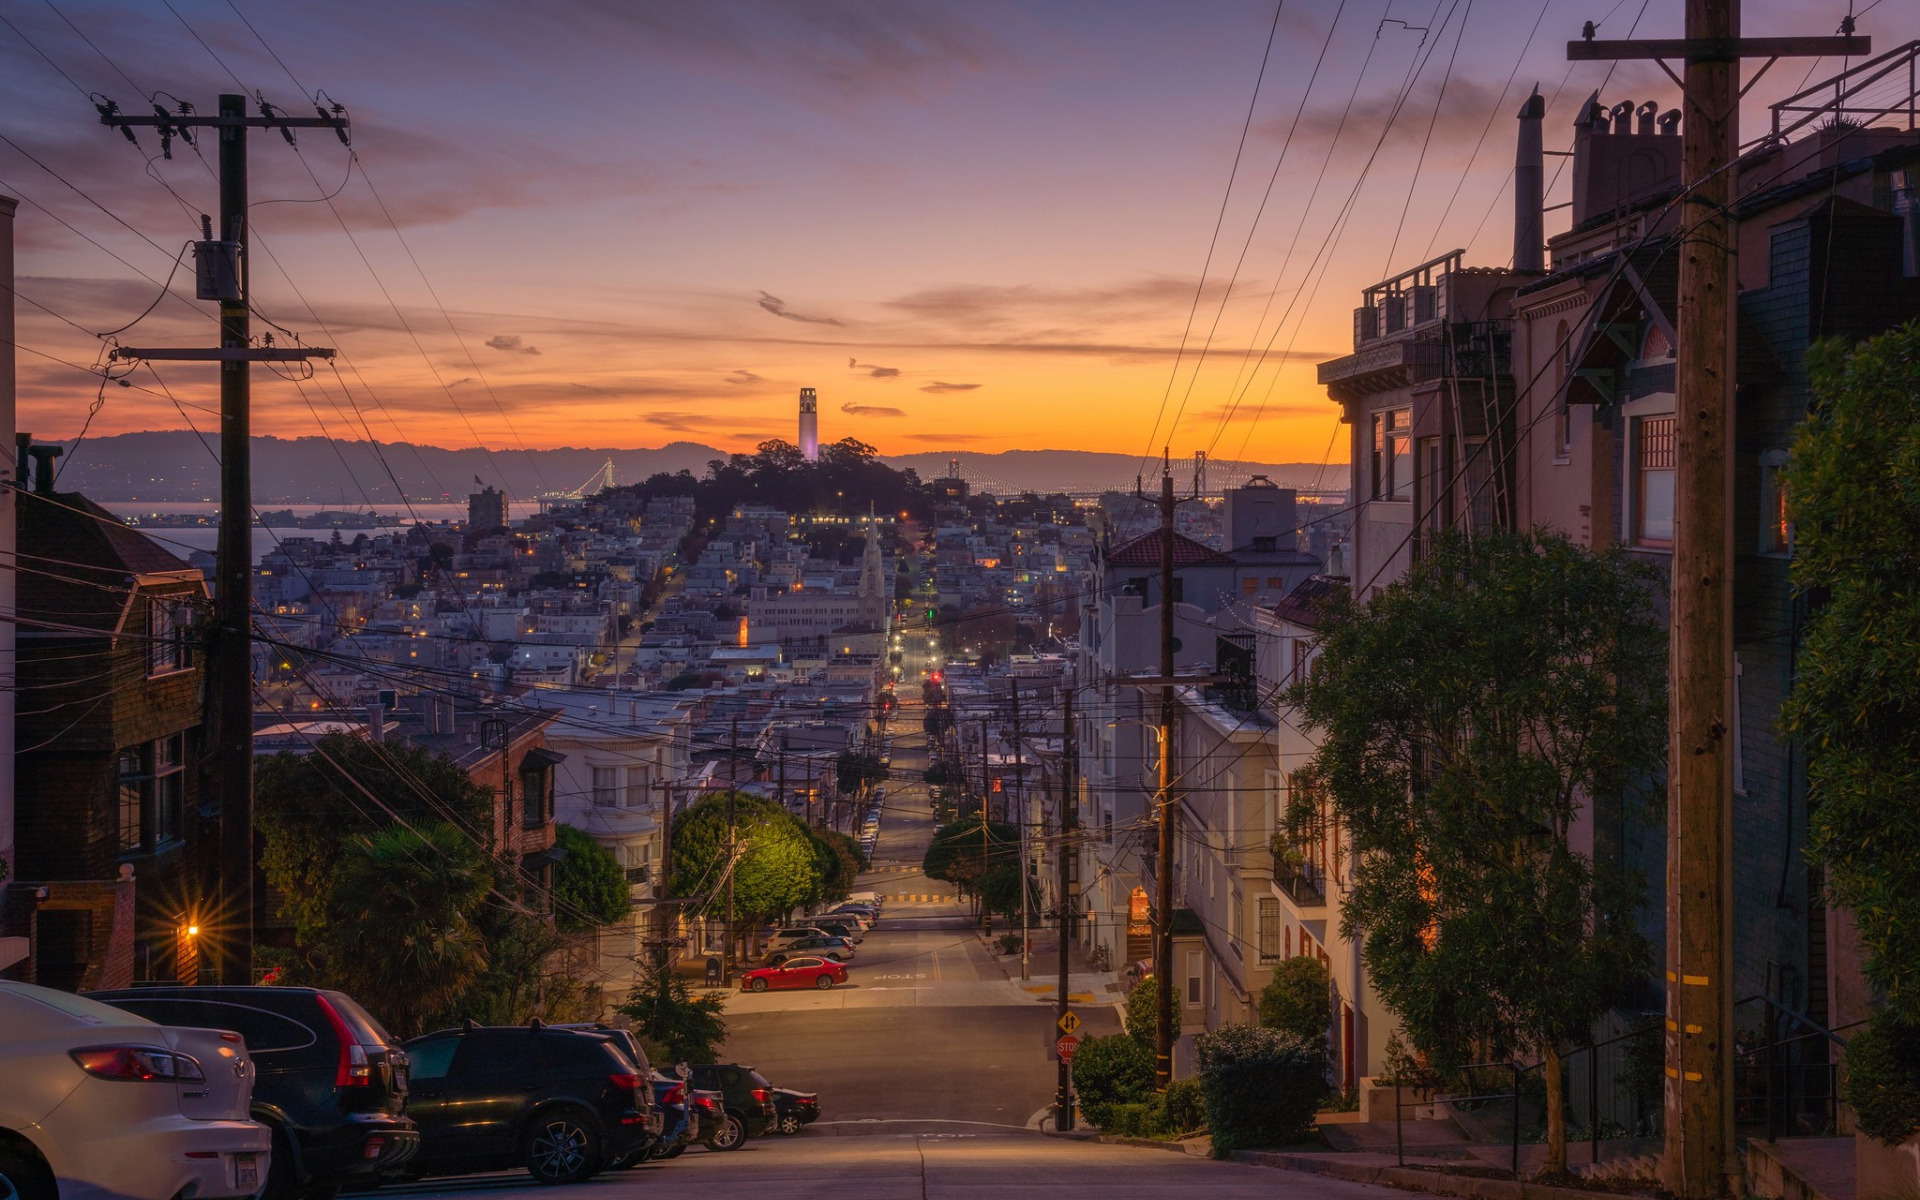 Download wallpaper San Francisco, California, evening, streets, sunset, San Francisco cityscape, houses, USA for desktop with resolution 1920x1200. High Quality HD picture wallpaper